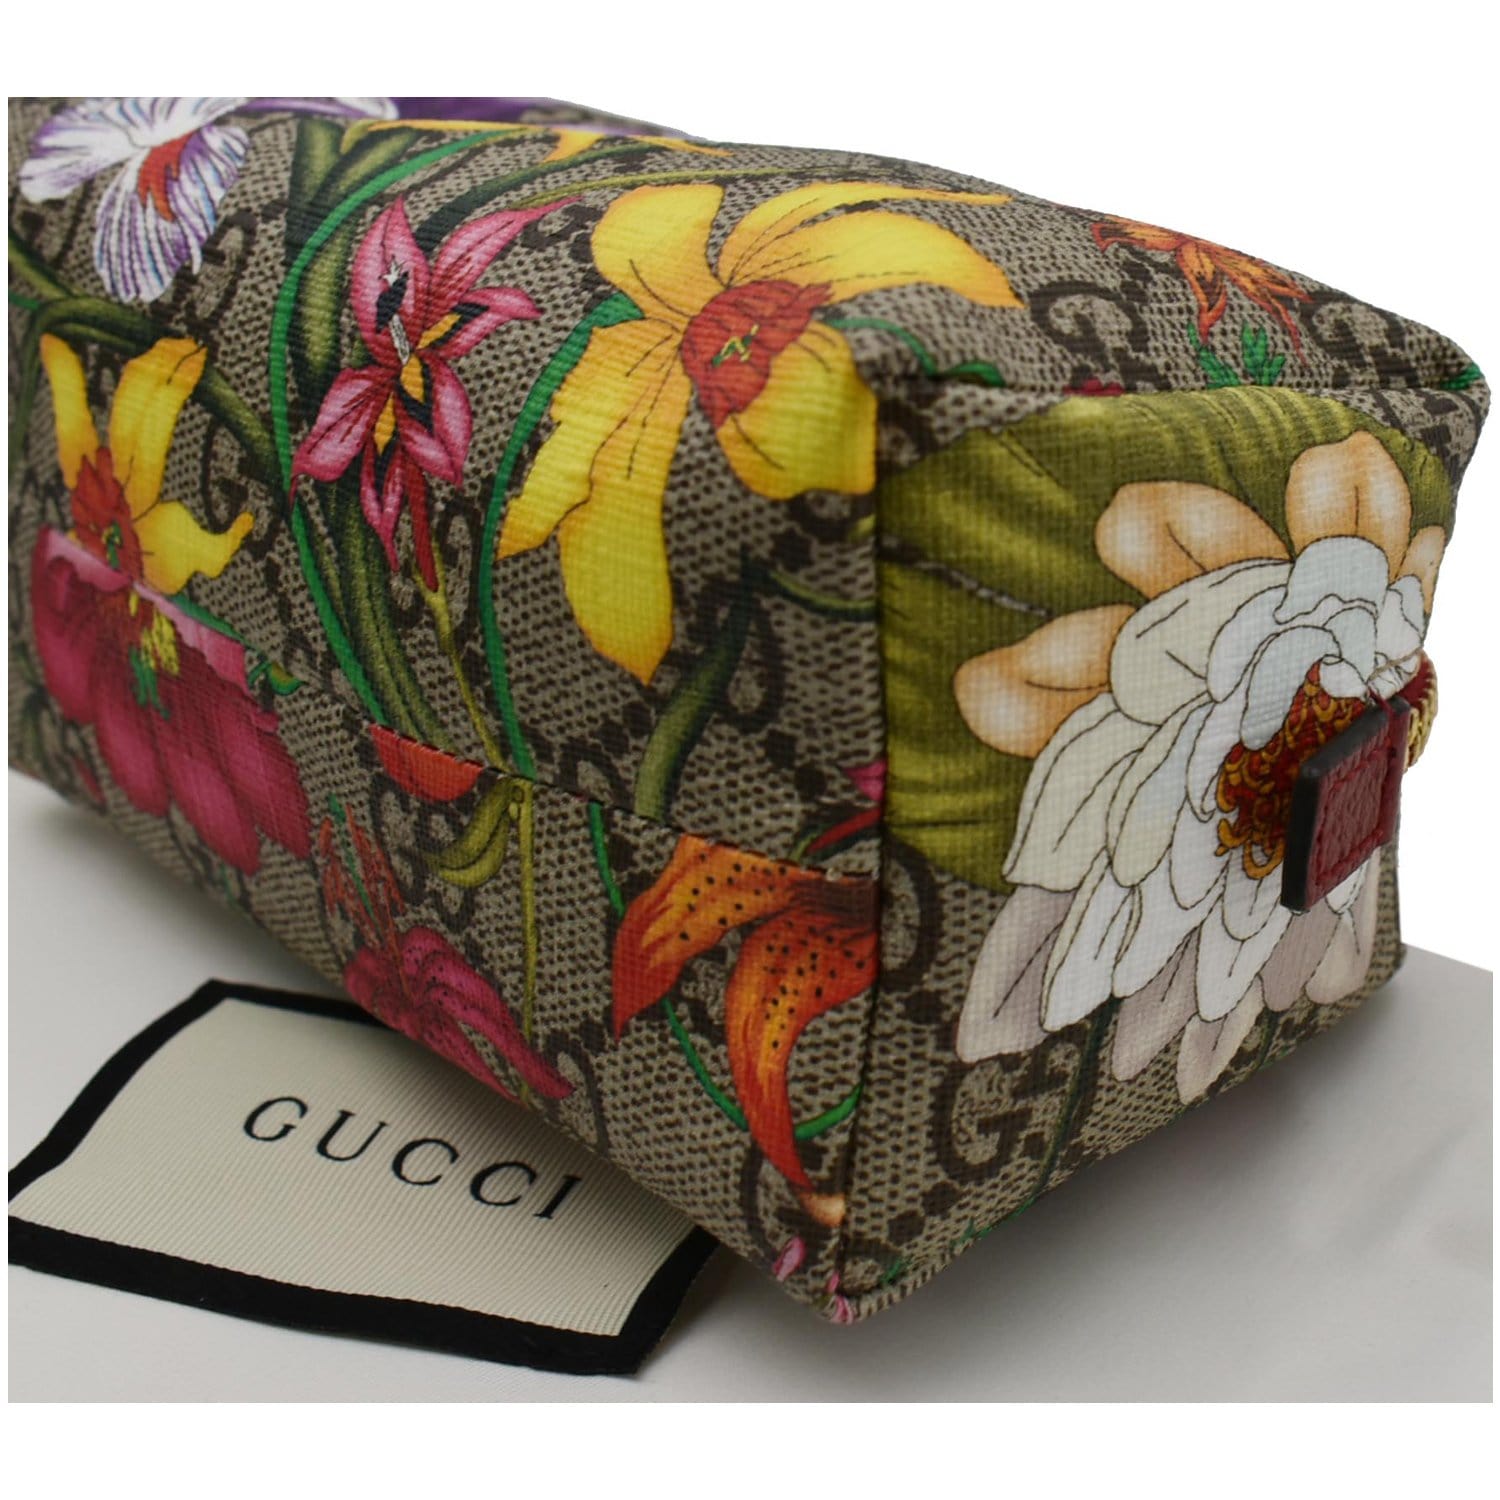 Shop GUCCI Ophidia toiletry case ( 739670 UULBN 1244, 739670 UULBN 1244) by  みのまいッシュ